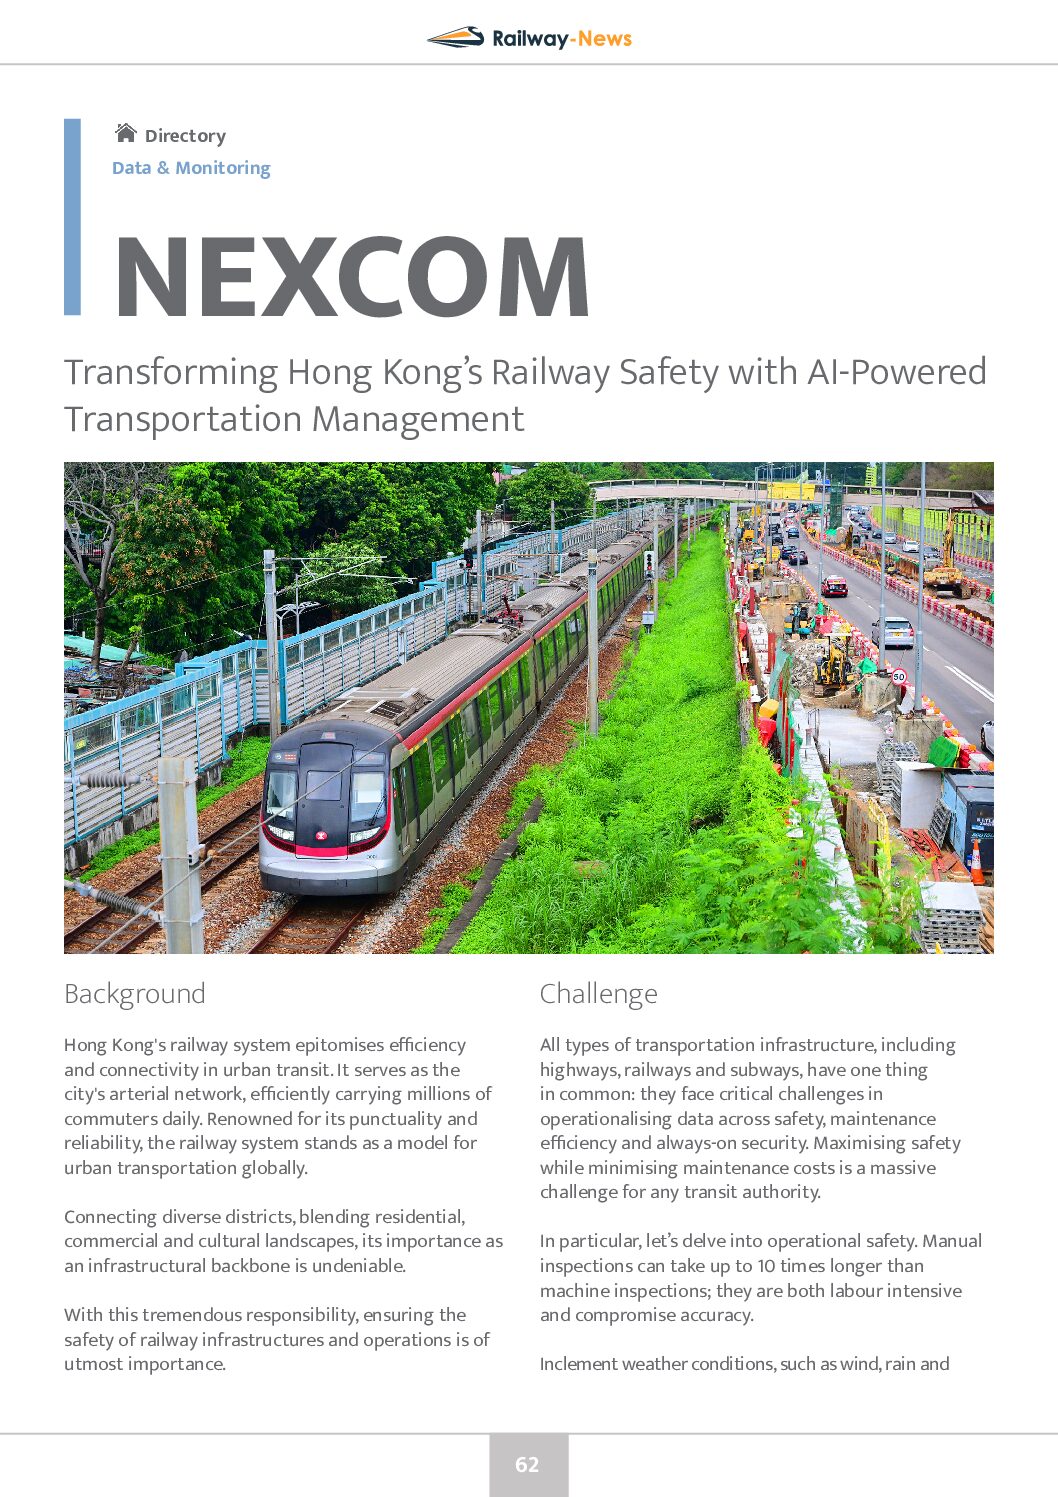 Transforming Hong Kong’s Railway Safety with AI-Powered Transportation Management